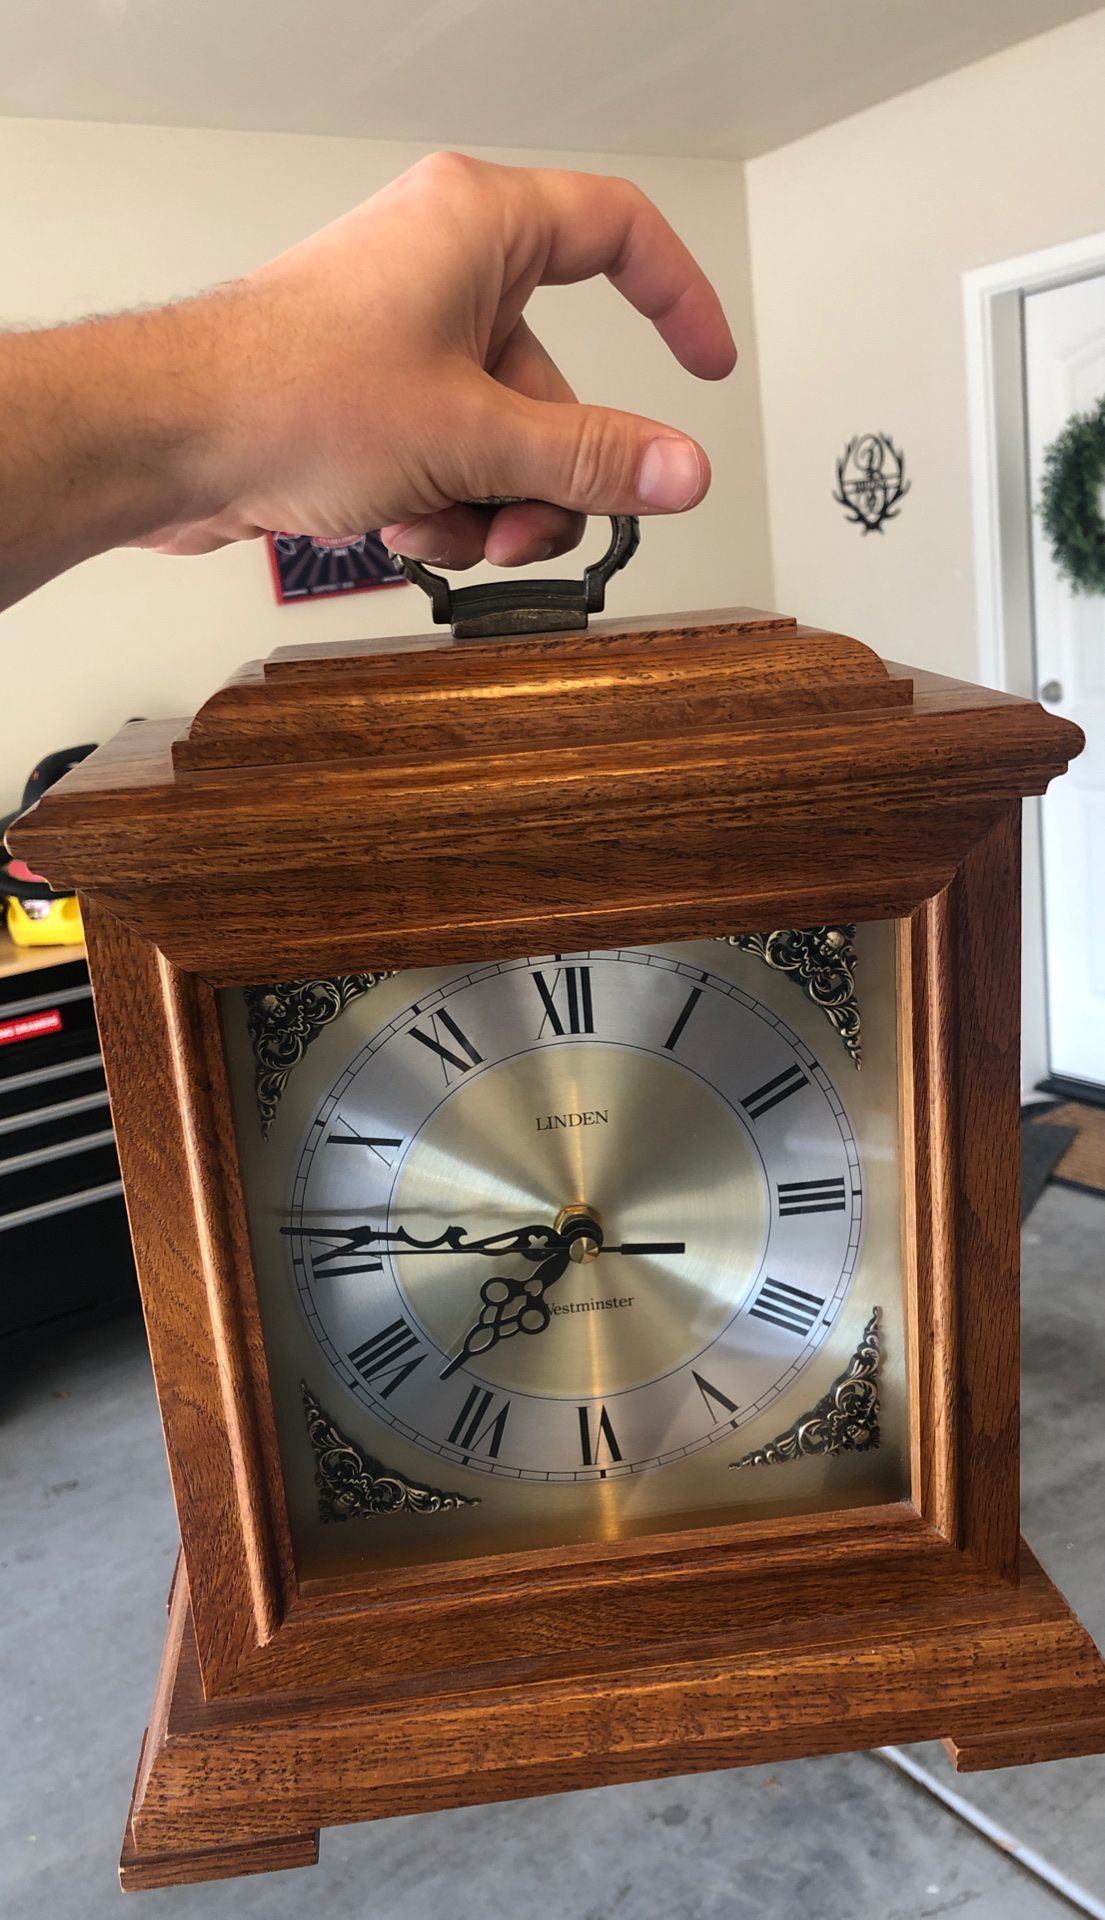 Linden Westminster Dual Chime Clock